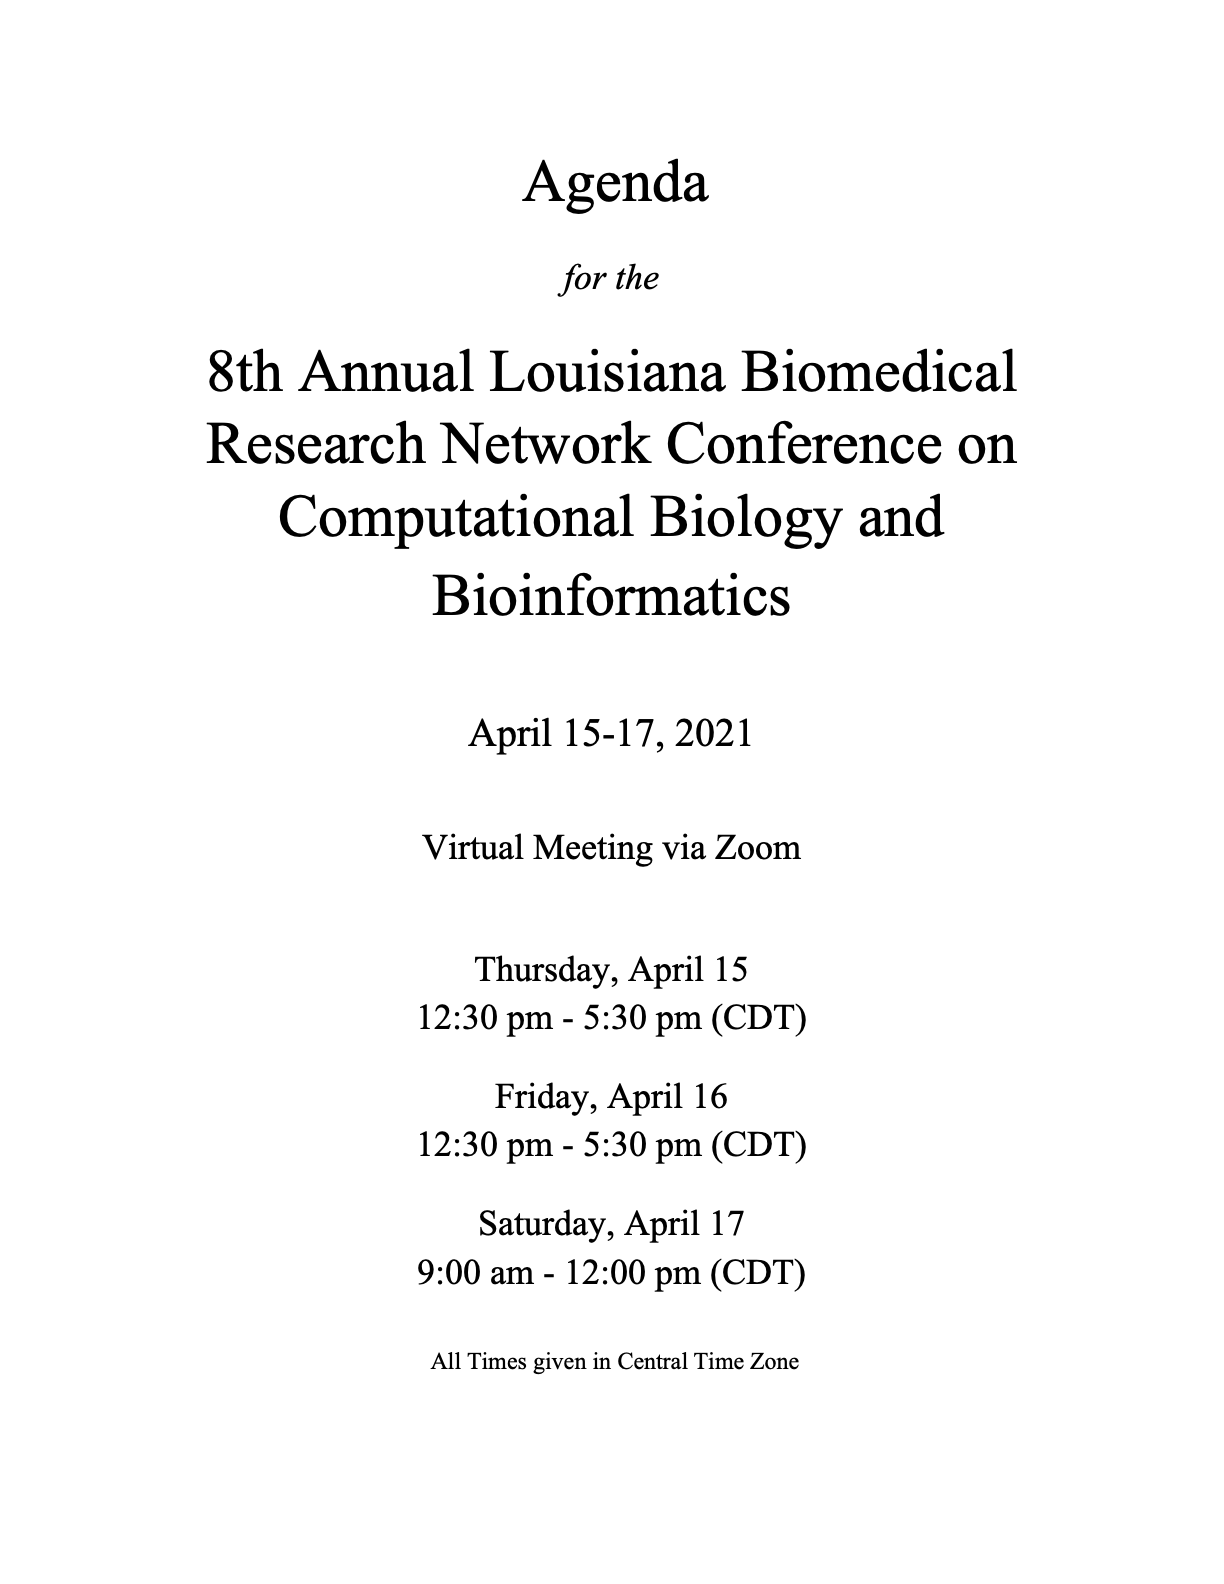 2021 8th Annual LBRN Conference on Computational Biology and Bioinformatics Agenda and Program (2021-04-15)